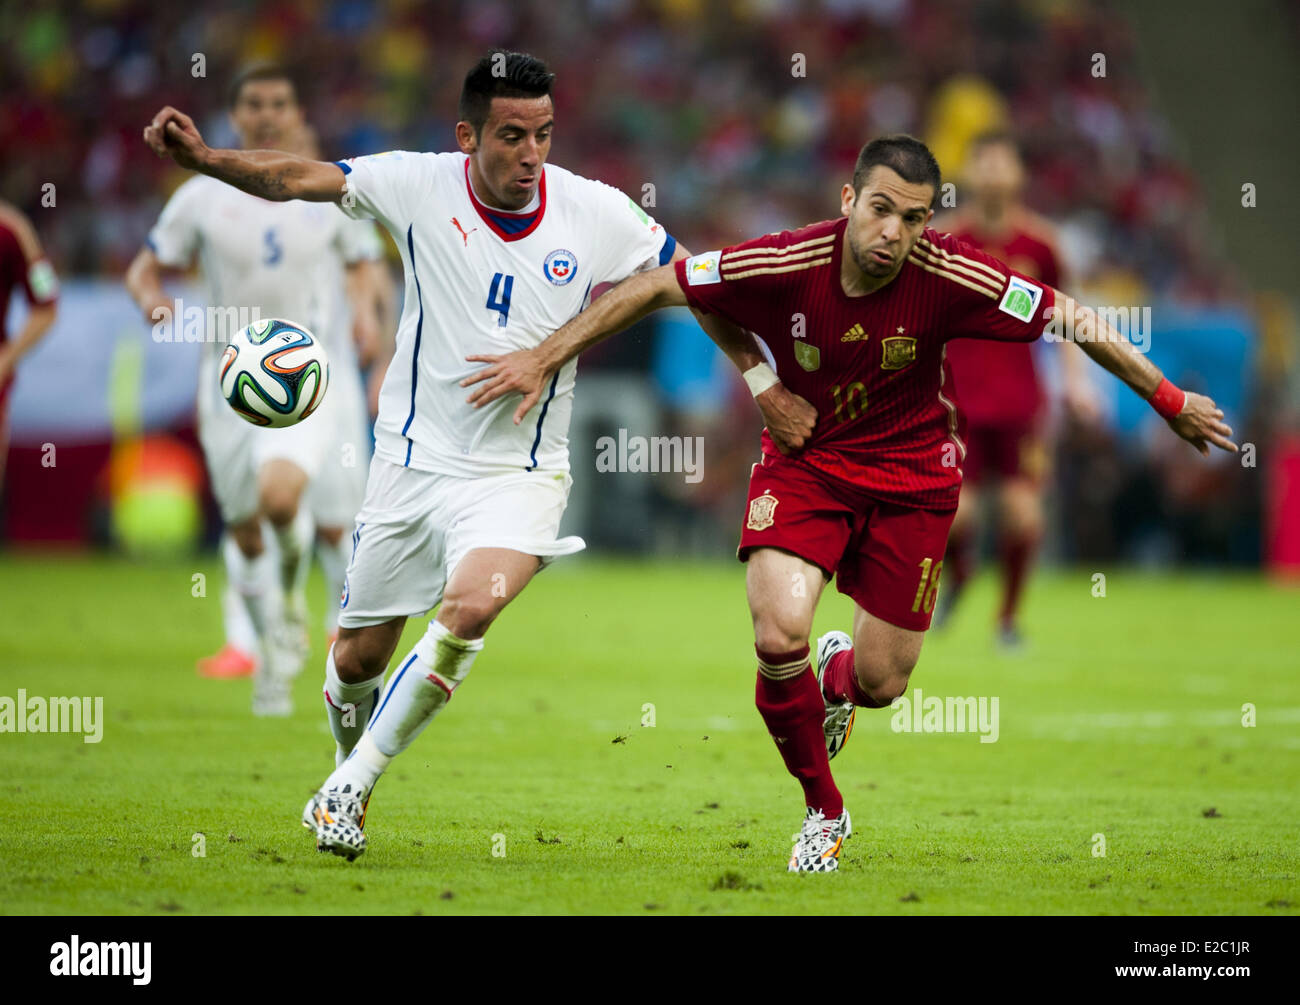 Porto Alegre, Brazil. 18th June, 2014.  Mauricio Isla and Jordi Alba in the match between Spain and Chile in the group stage of the 2014 World Cup, for the group B match at the Beira Rio stadium, on June 18, 2014  Credit:  Urbanandsport/NurPhoto/ZUMAPRESS.com/Alamy Live News Stock Photo